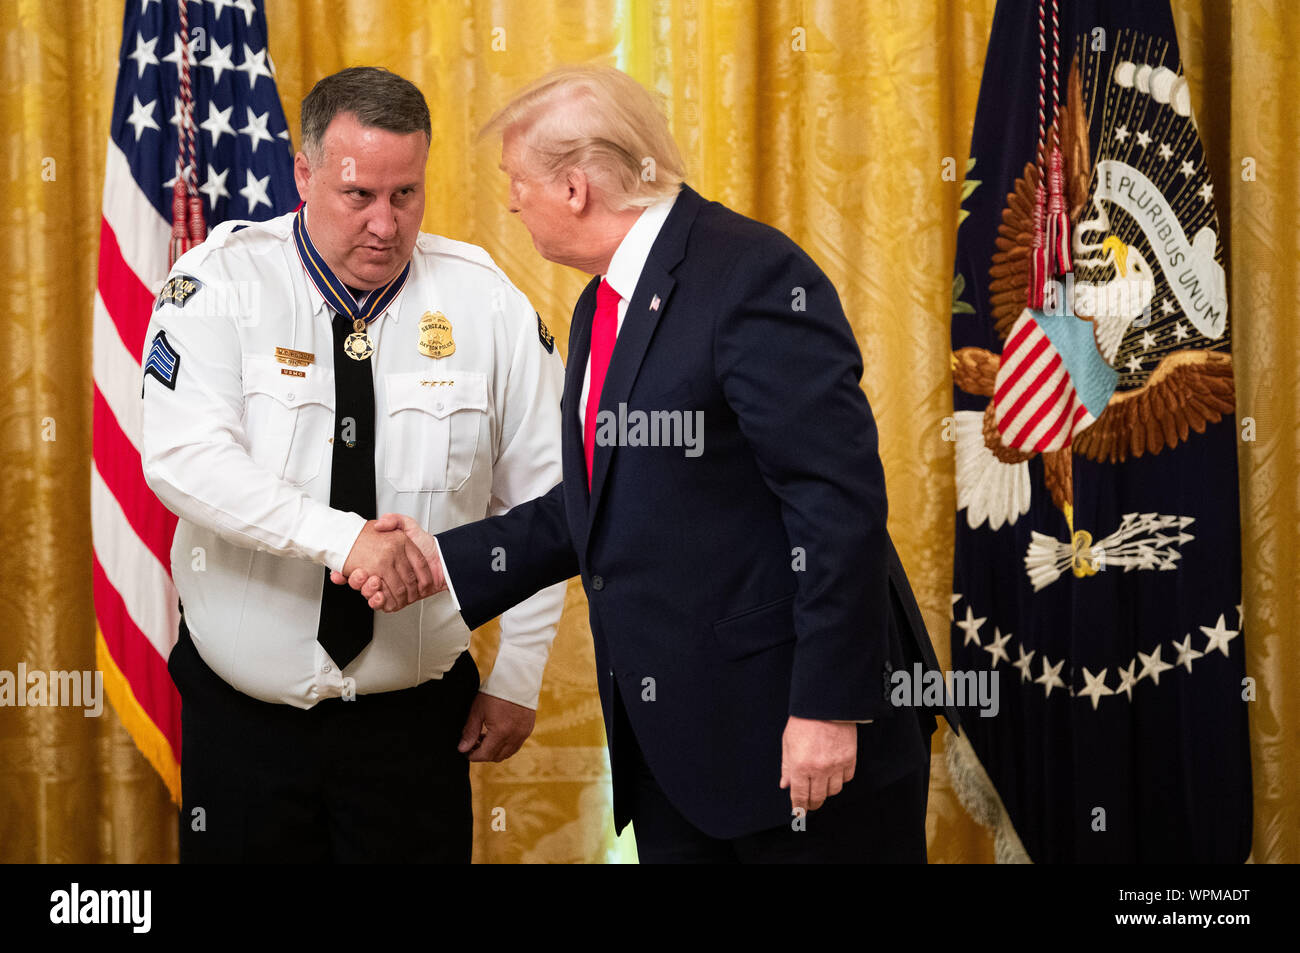 Washington, United States. 09th Sep, 2019. President Donald Trump awards Dayton Police Sgt. William C. Knight the Public Safety Officer Medal of Valor, during a ceremony in the East Room at the White House in Washington, DC on Monday, September 9, 2019. Trump recognized the six Dayton officers who stoped a mass shooting on August 4th and honored 5 civilians who helped during a mass shooting at a Walmart in El Paso a day before. Photo by Kevin Dietsch/UPI Credit: UPI/Alamy Live News Stock Photo